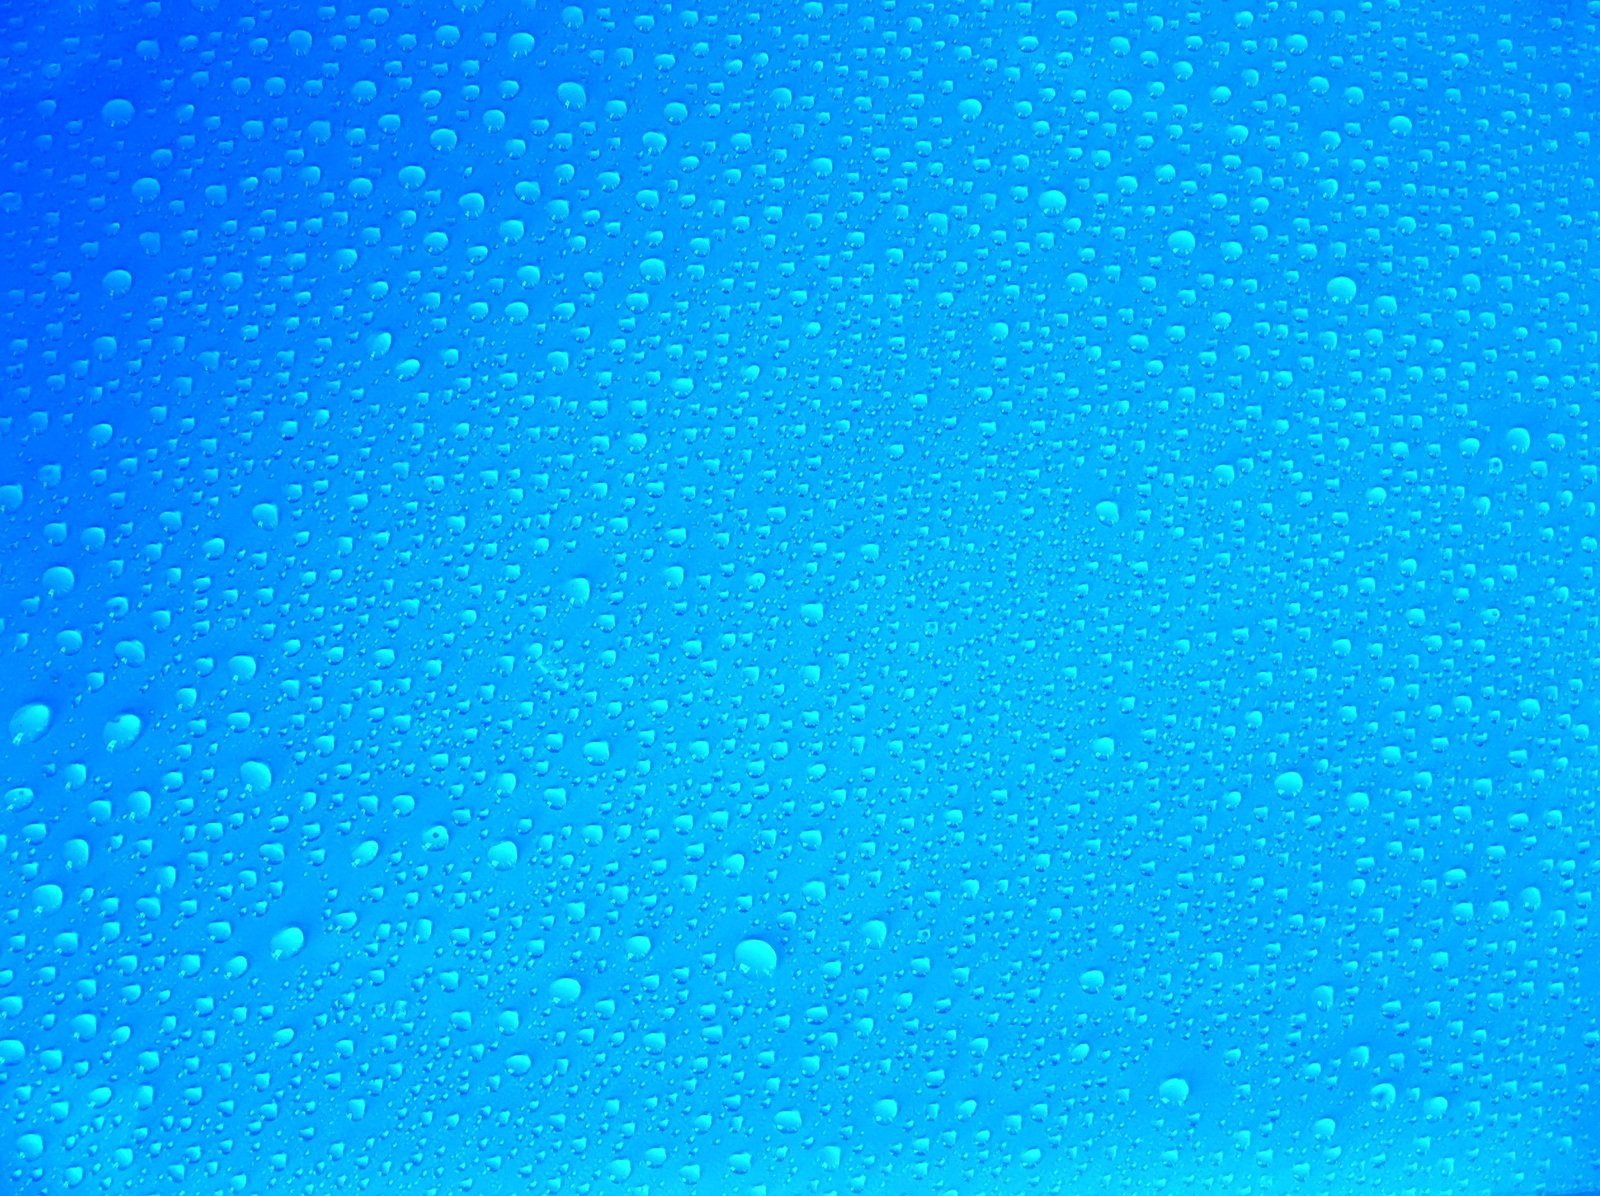 some water droplets are sitting on the glass